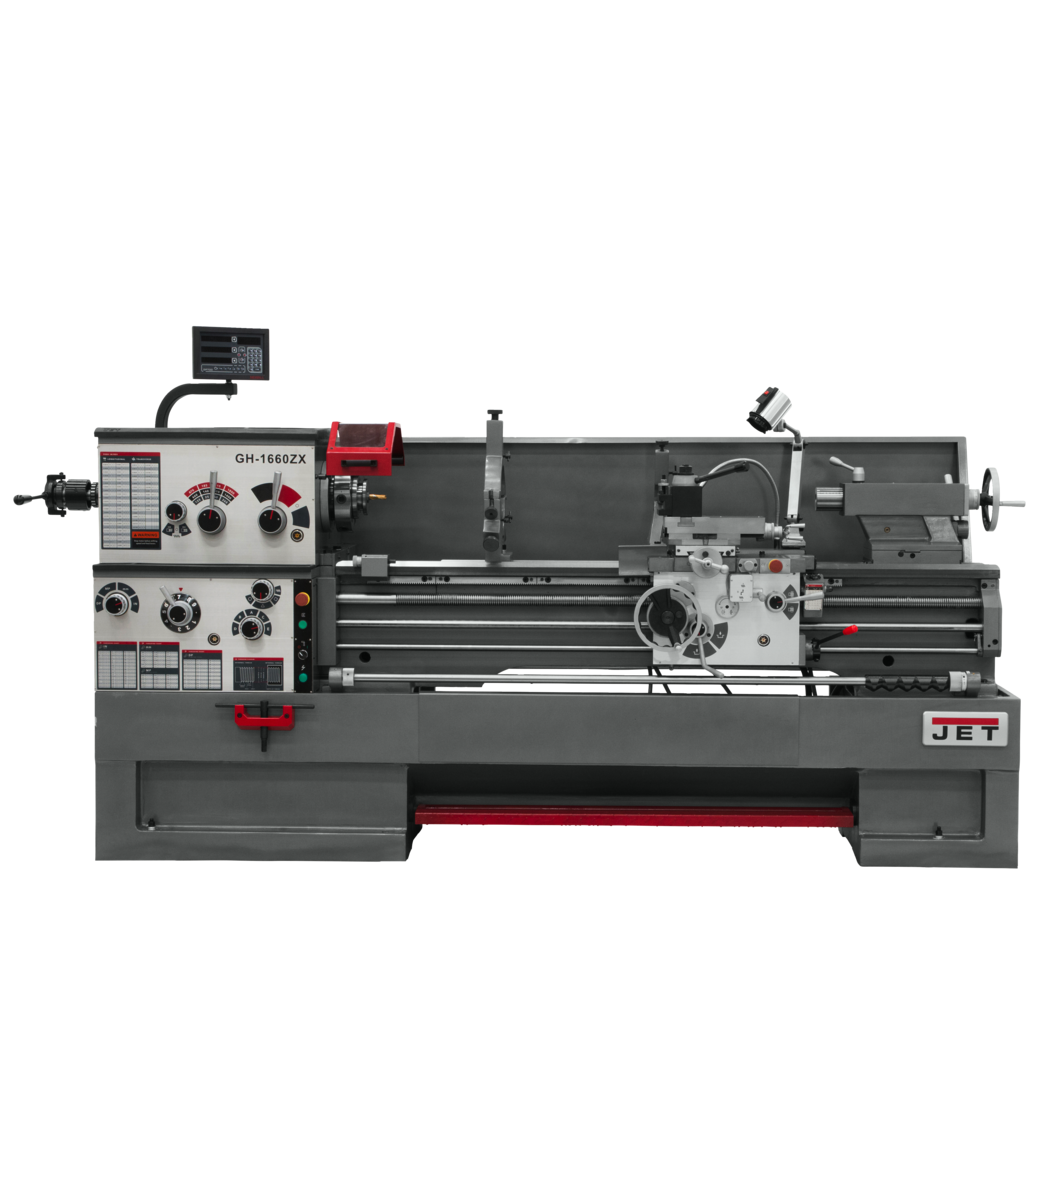 321576, GH-1660ZX Lathe with 2-axis ACU-RITE 203, Taper Attachment & Collet Closer Installed, Jet, Metalworking, Turning, Lathes